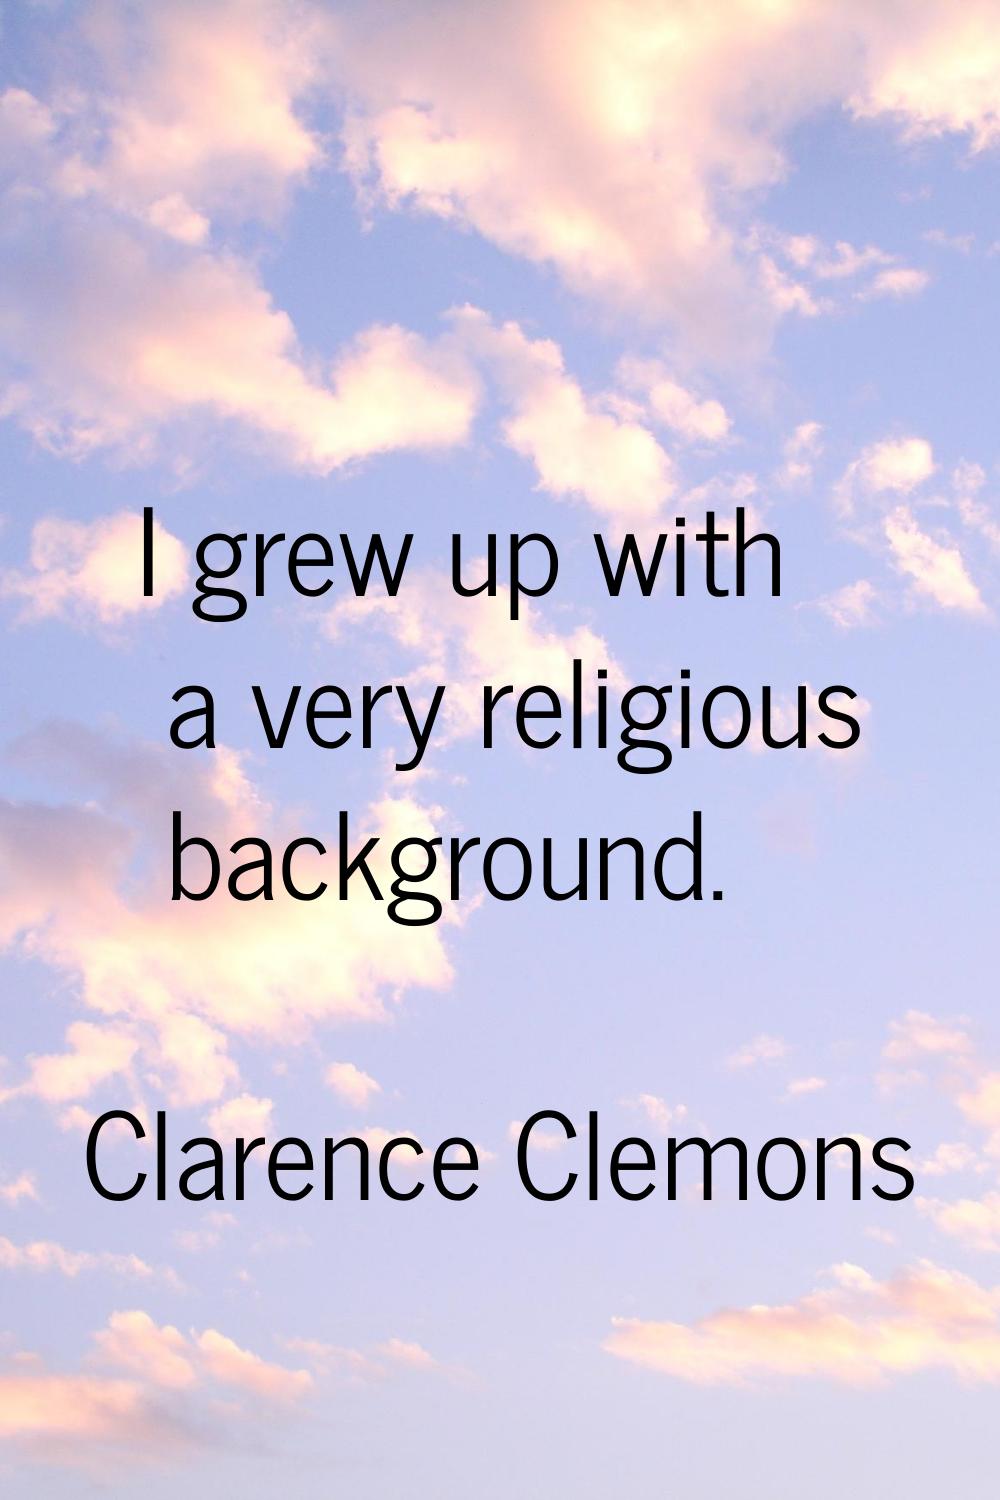 I grew up with a very religious background.